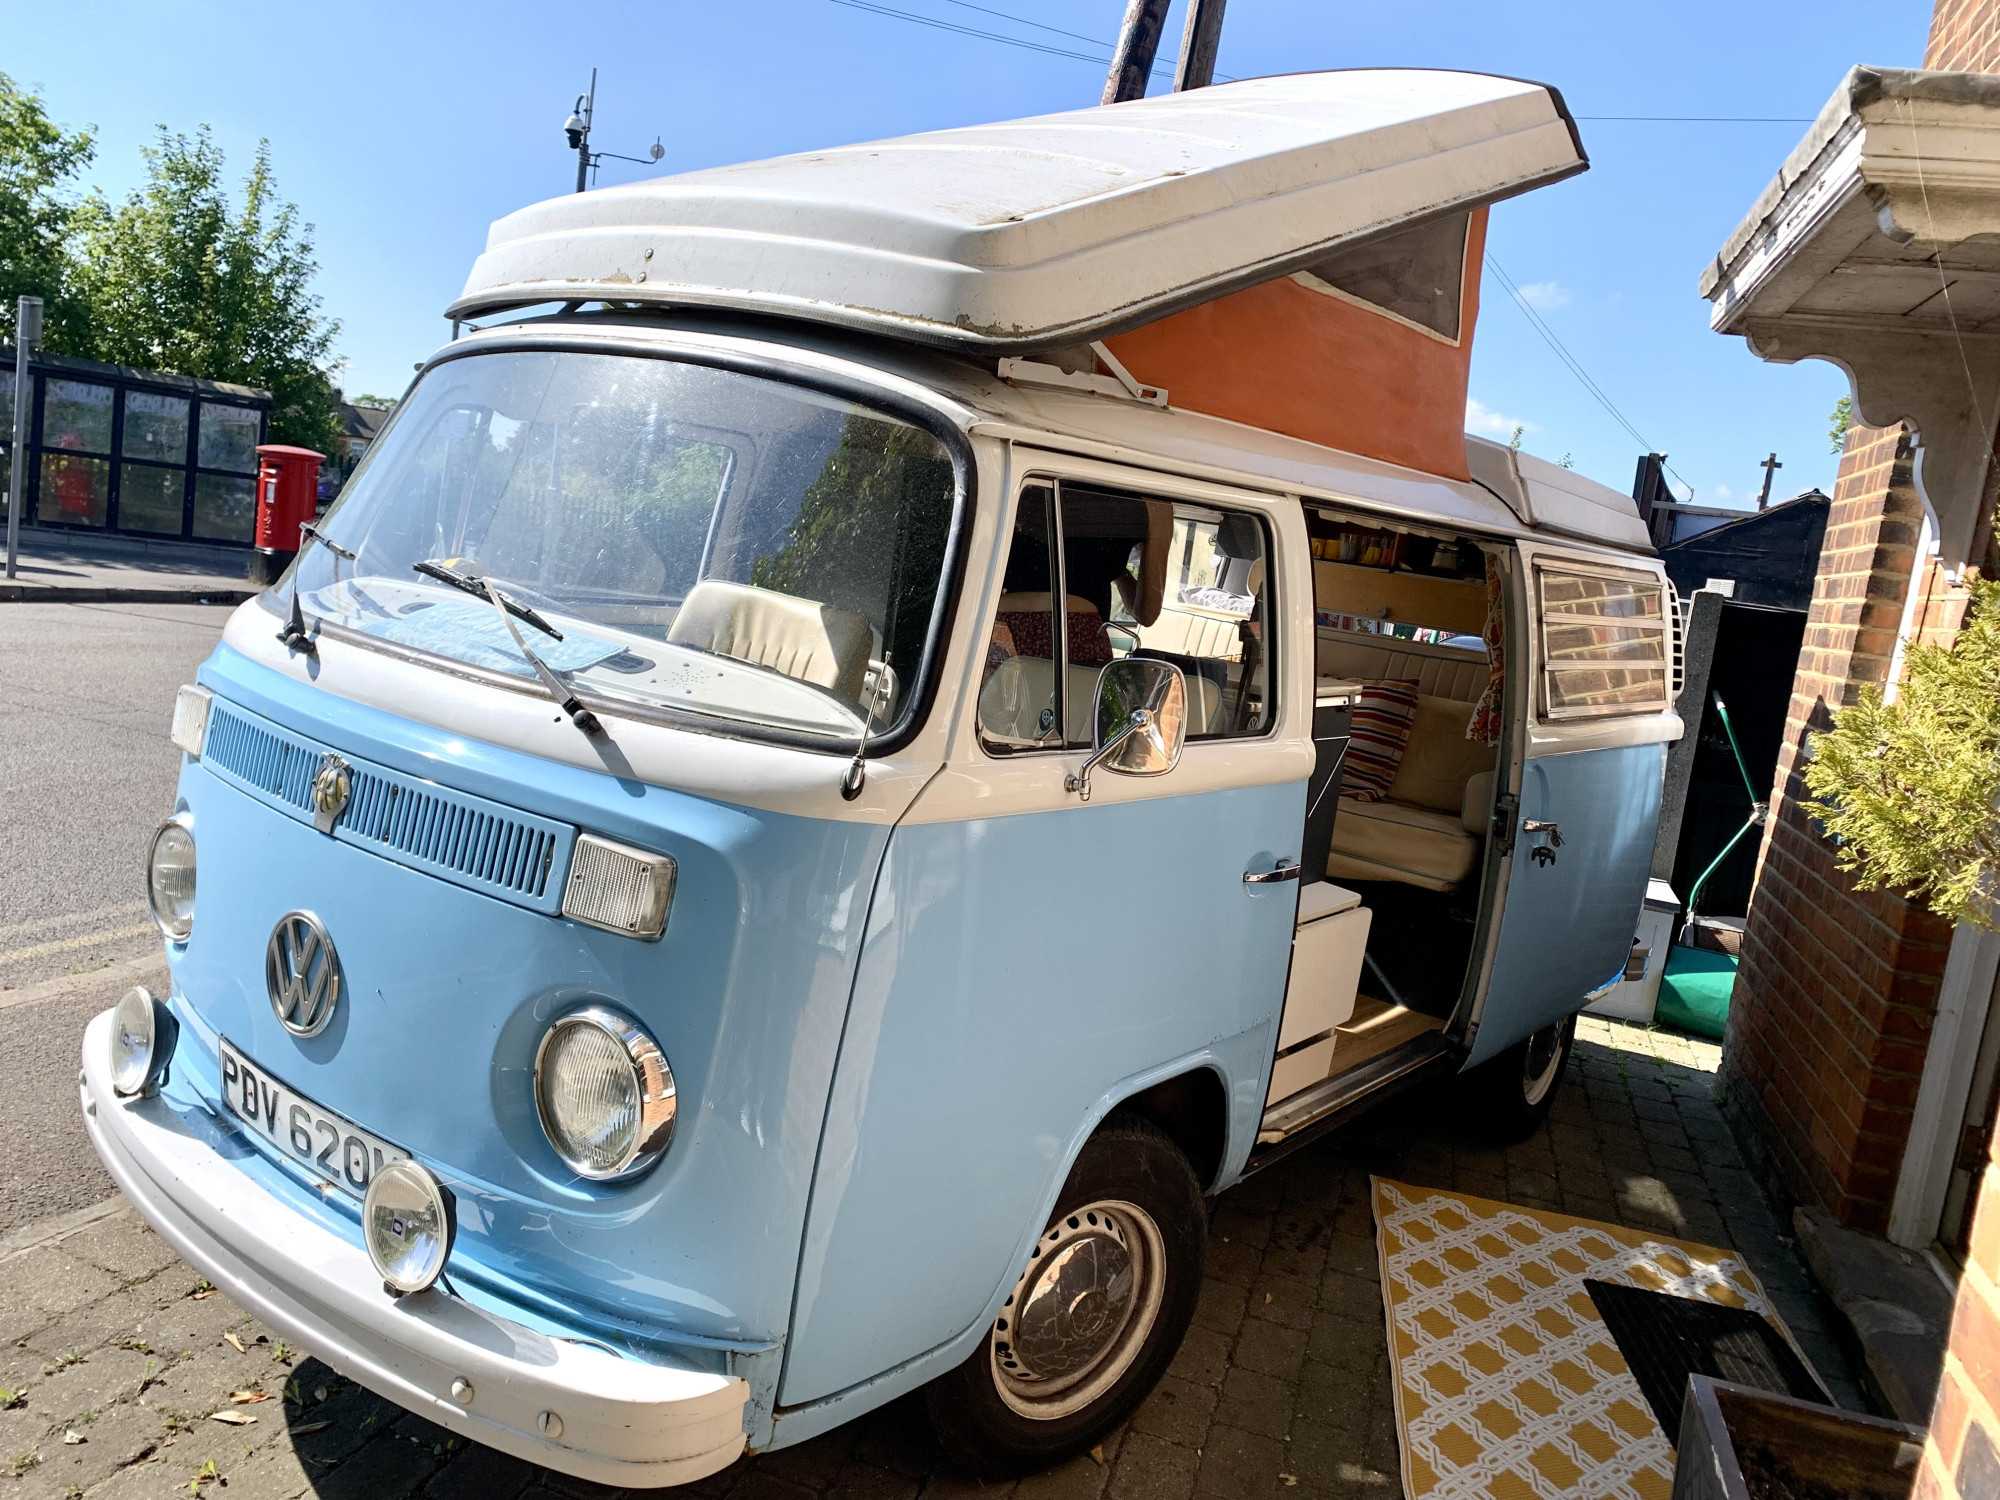 A  Campervan called Harvey and  for hire in Witham, Essex